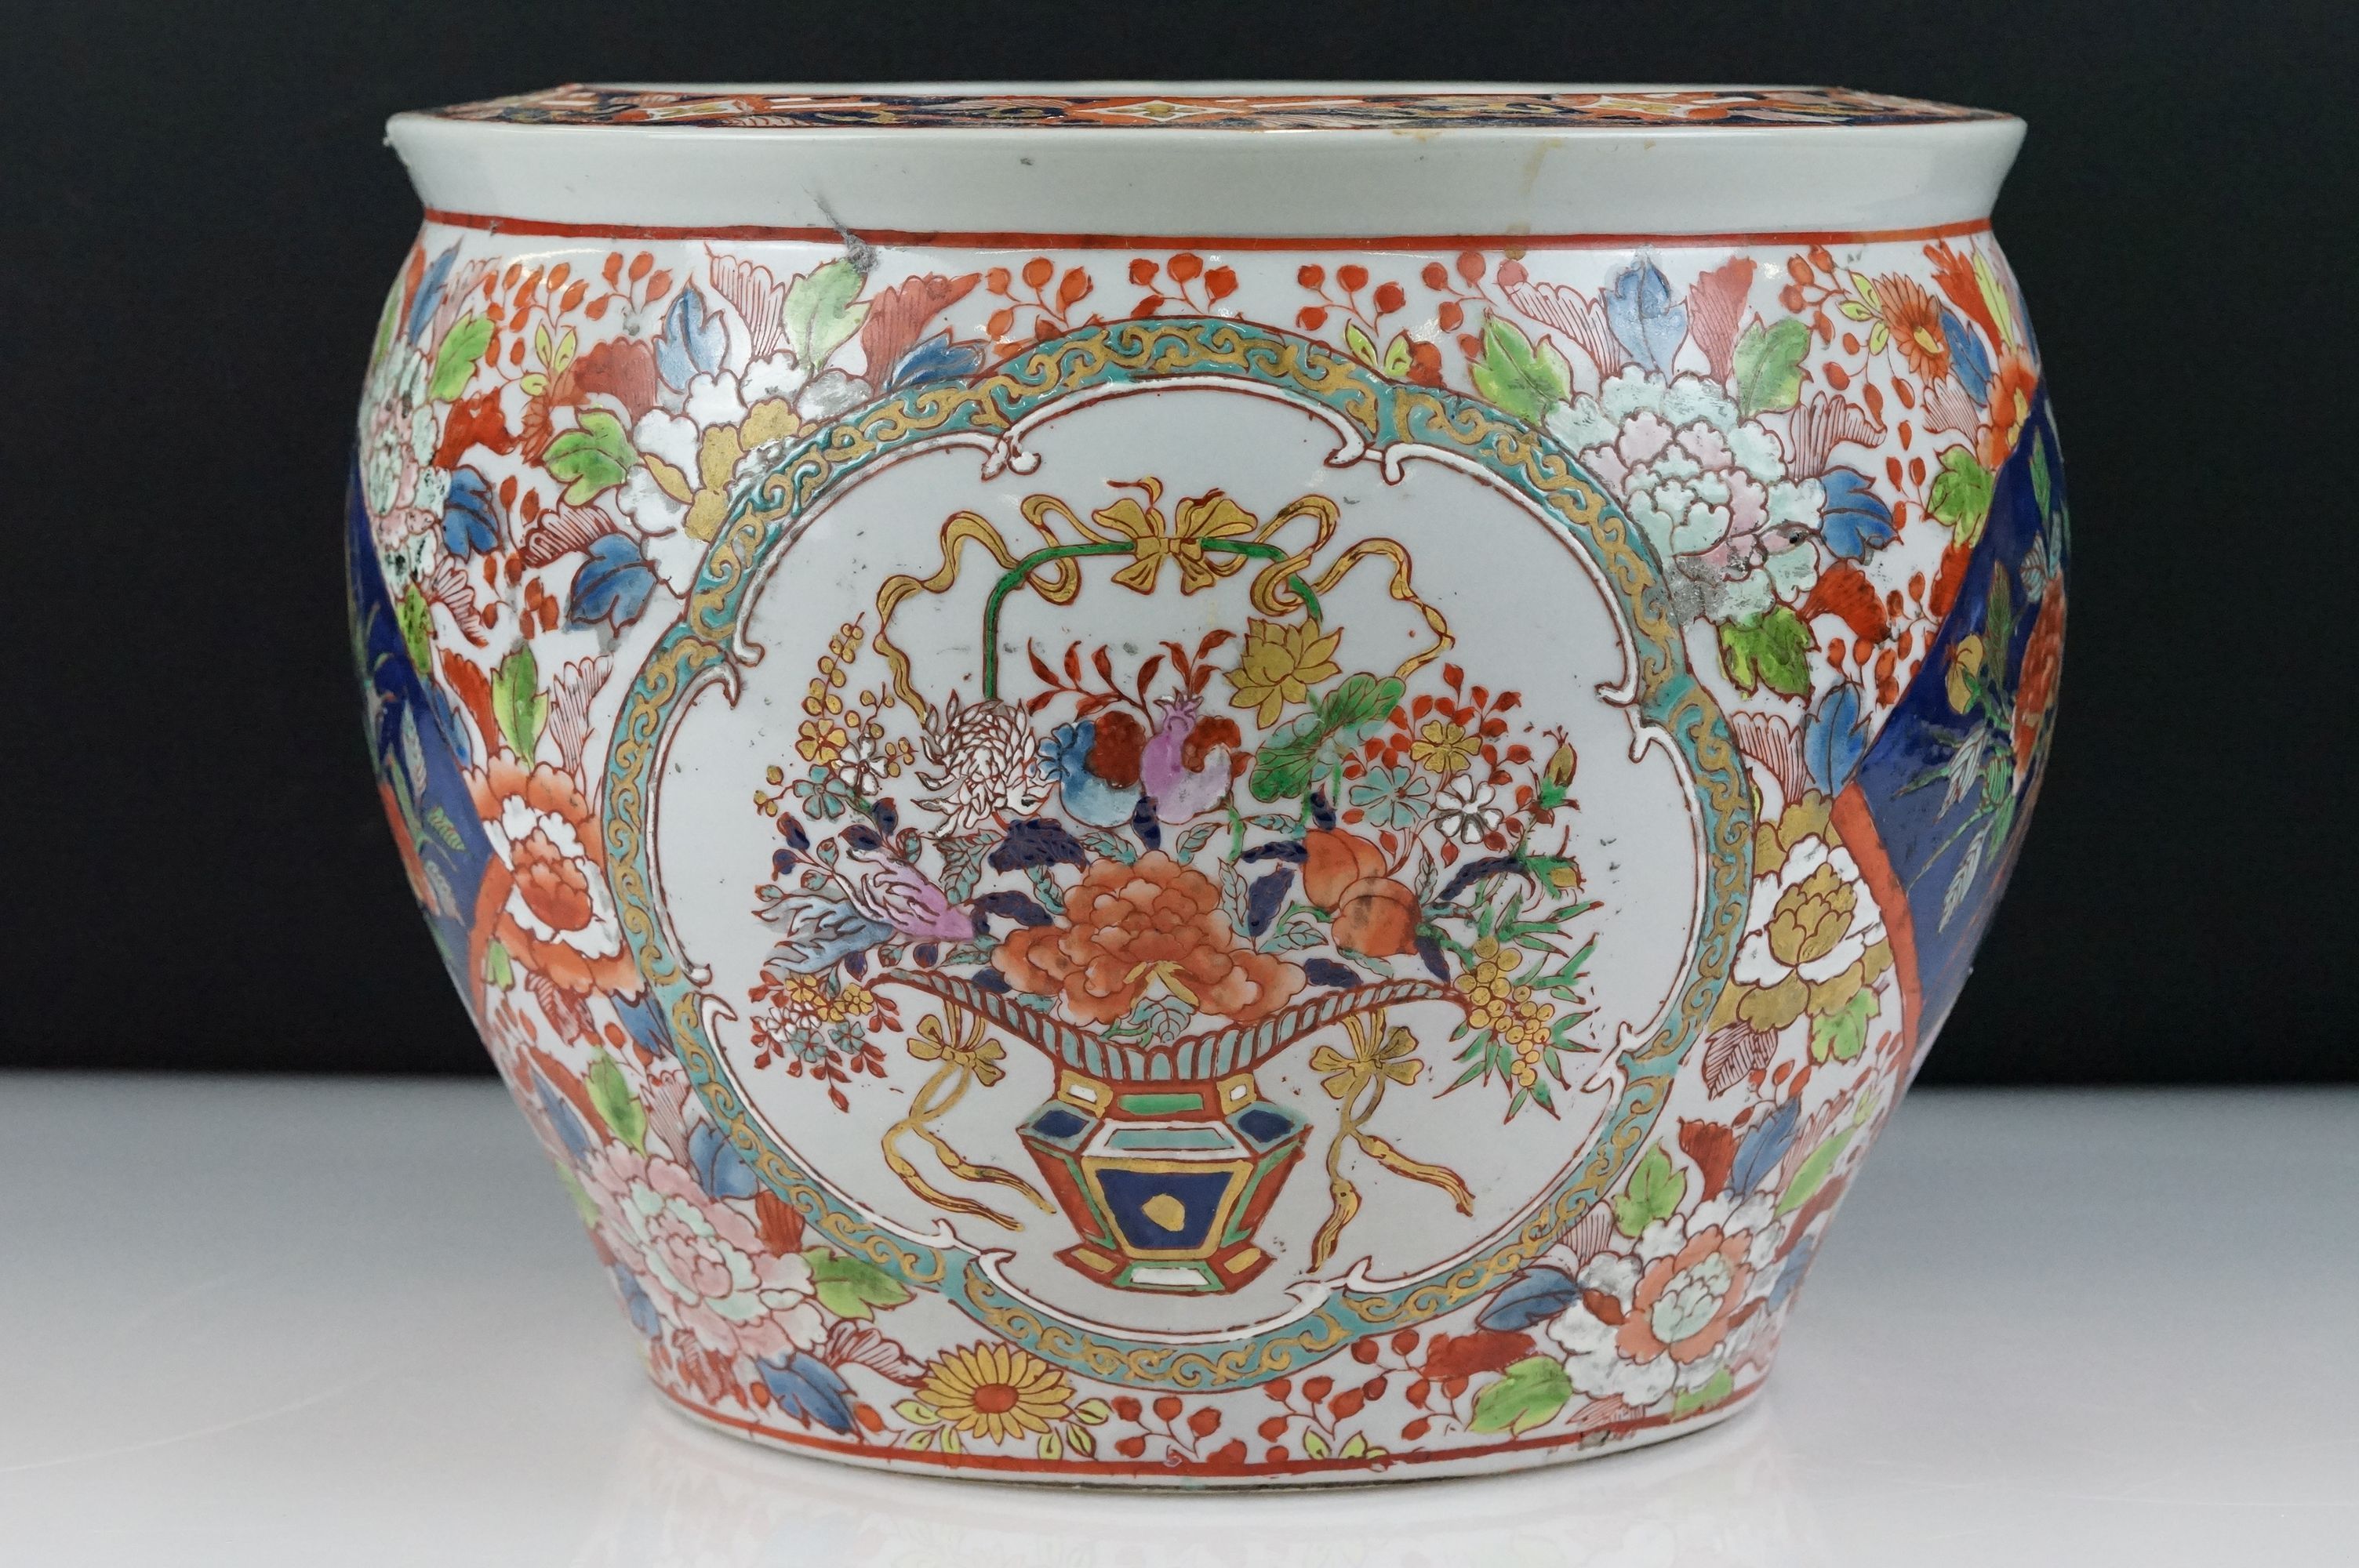 20th century Chinese Stoneware Fish Bowl decorated in a floral pattern of red, greens and blues, - Image 3 of 10